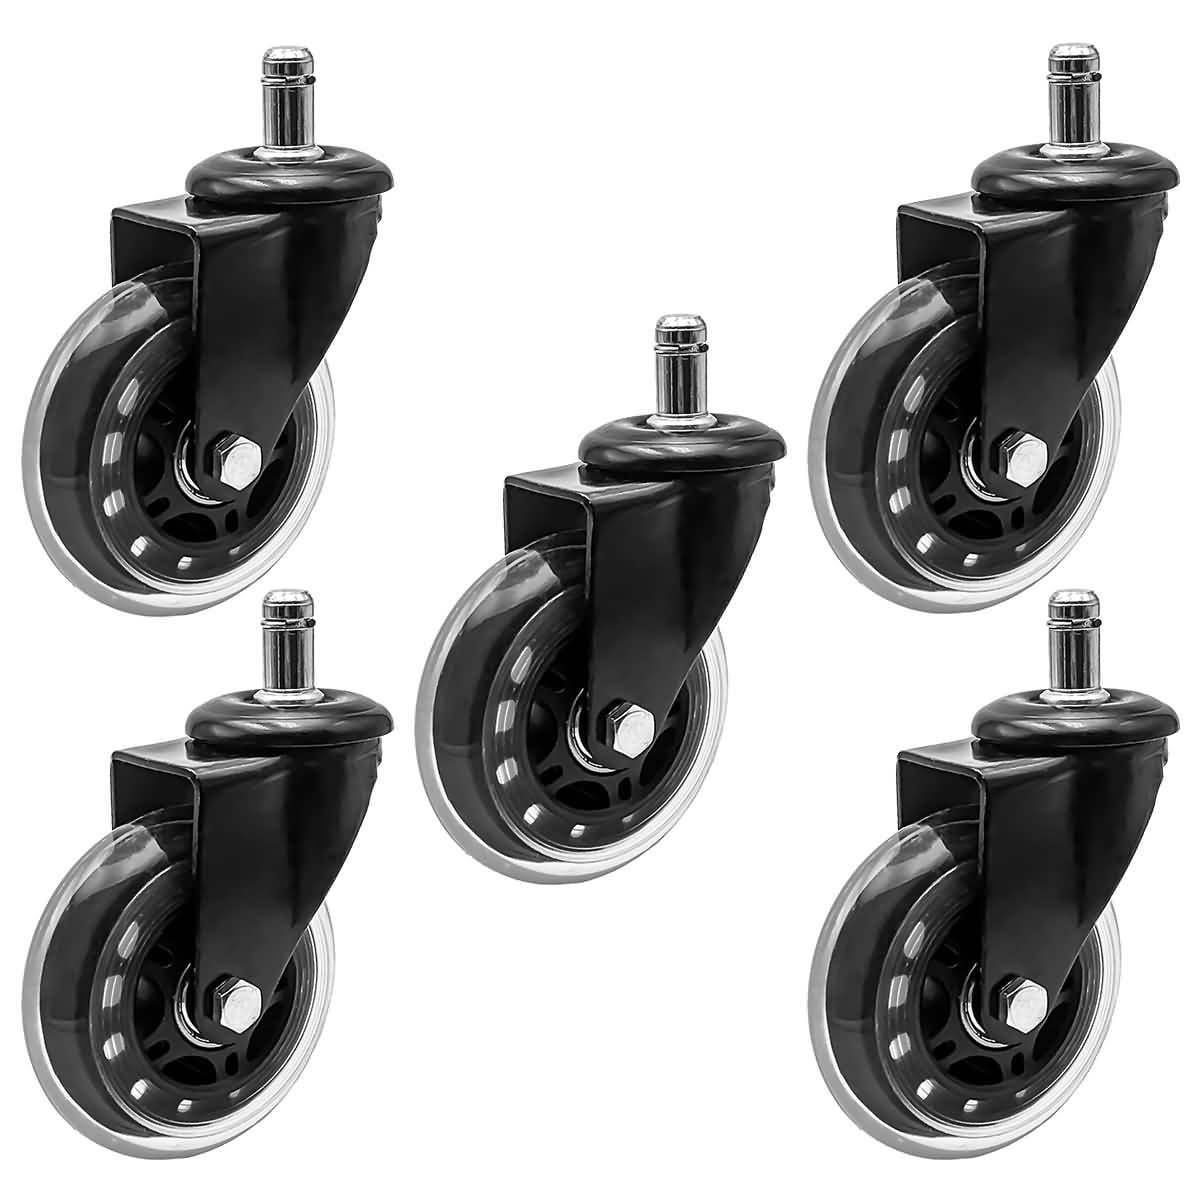 5x 50mm Computer Office Chair Caster Wheels Replacements  Castor pack of 5 NEW 